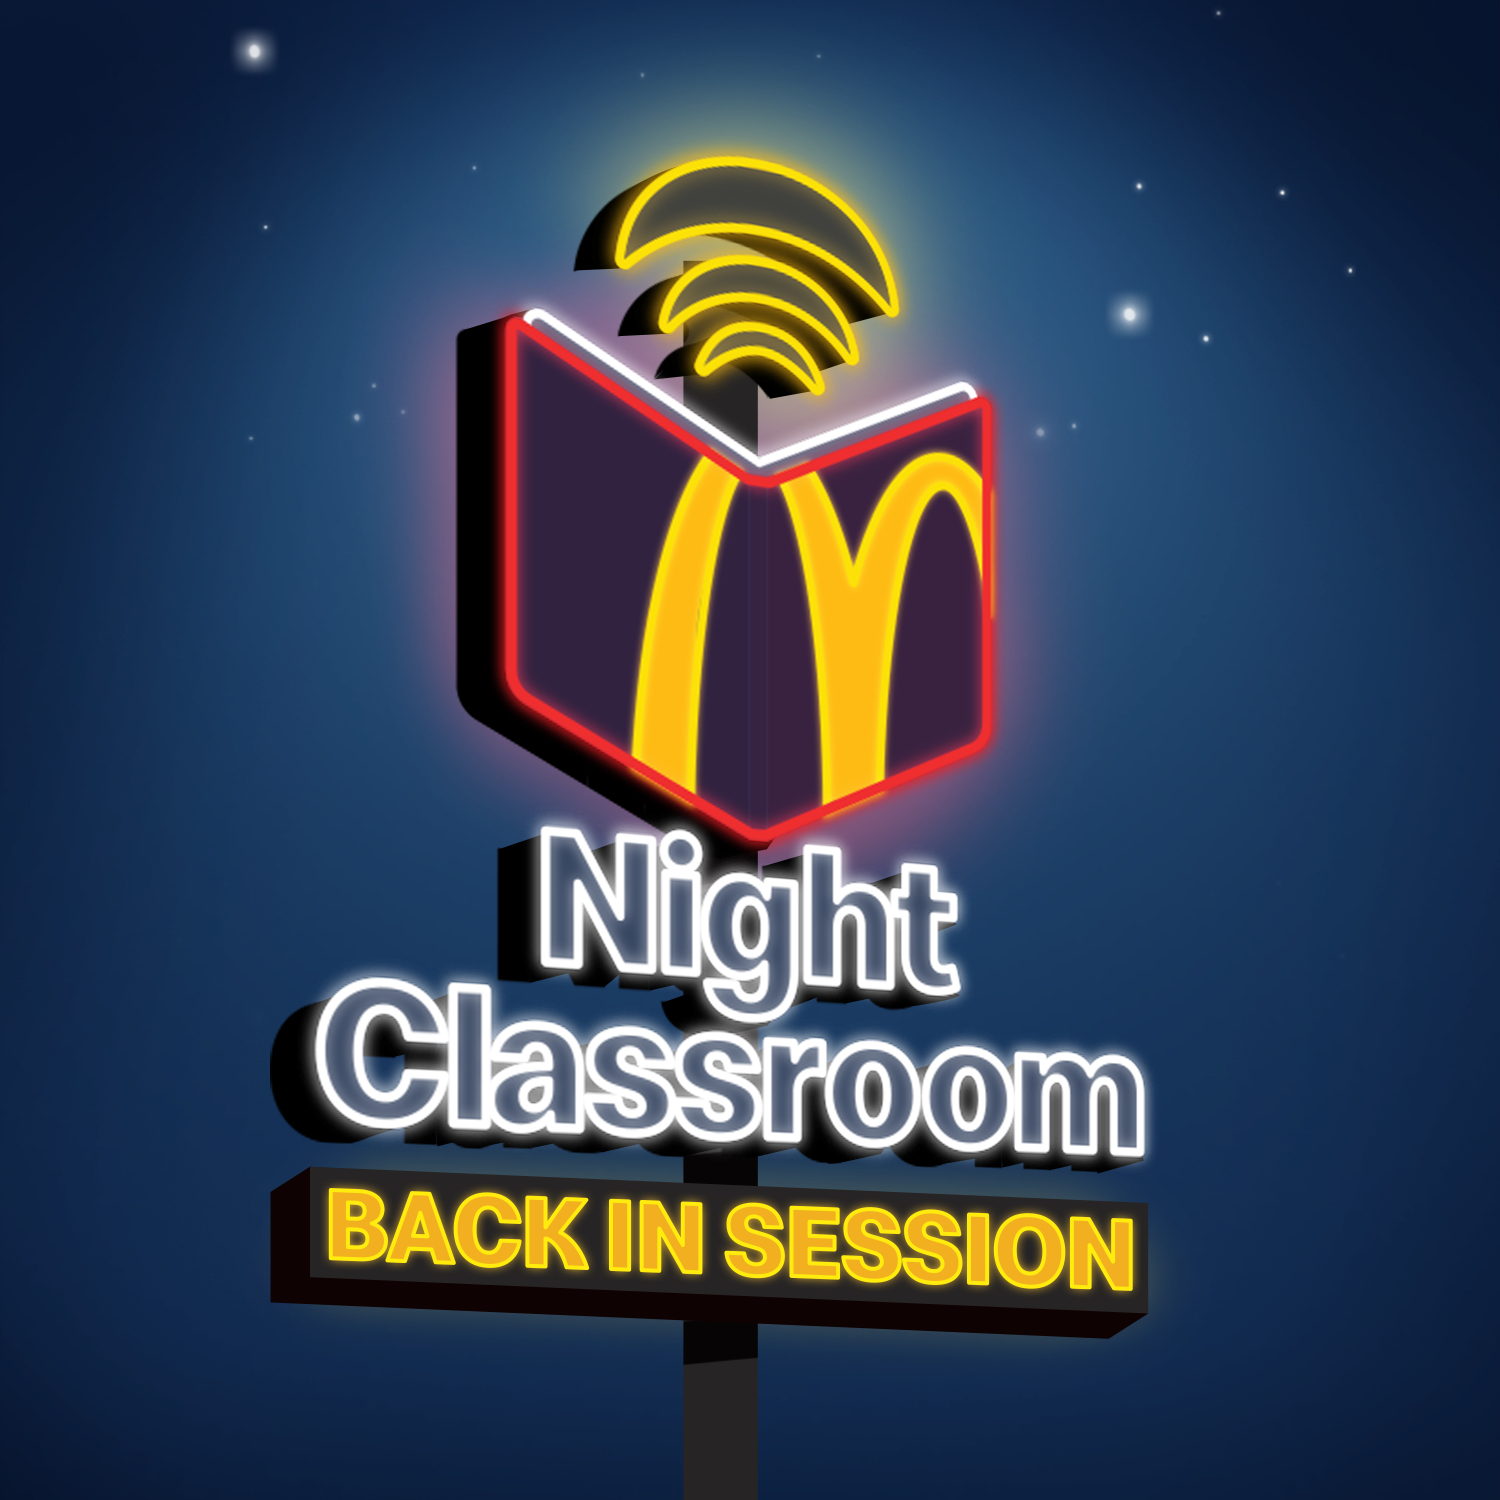 McDonald’s Launches Wave 3 of “Night Classroom” for Students Nationwide